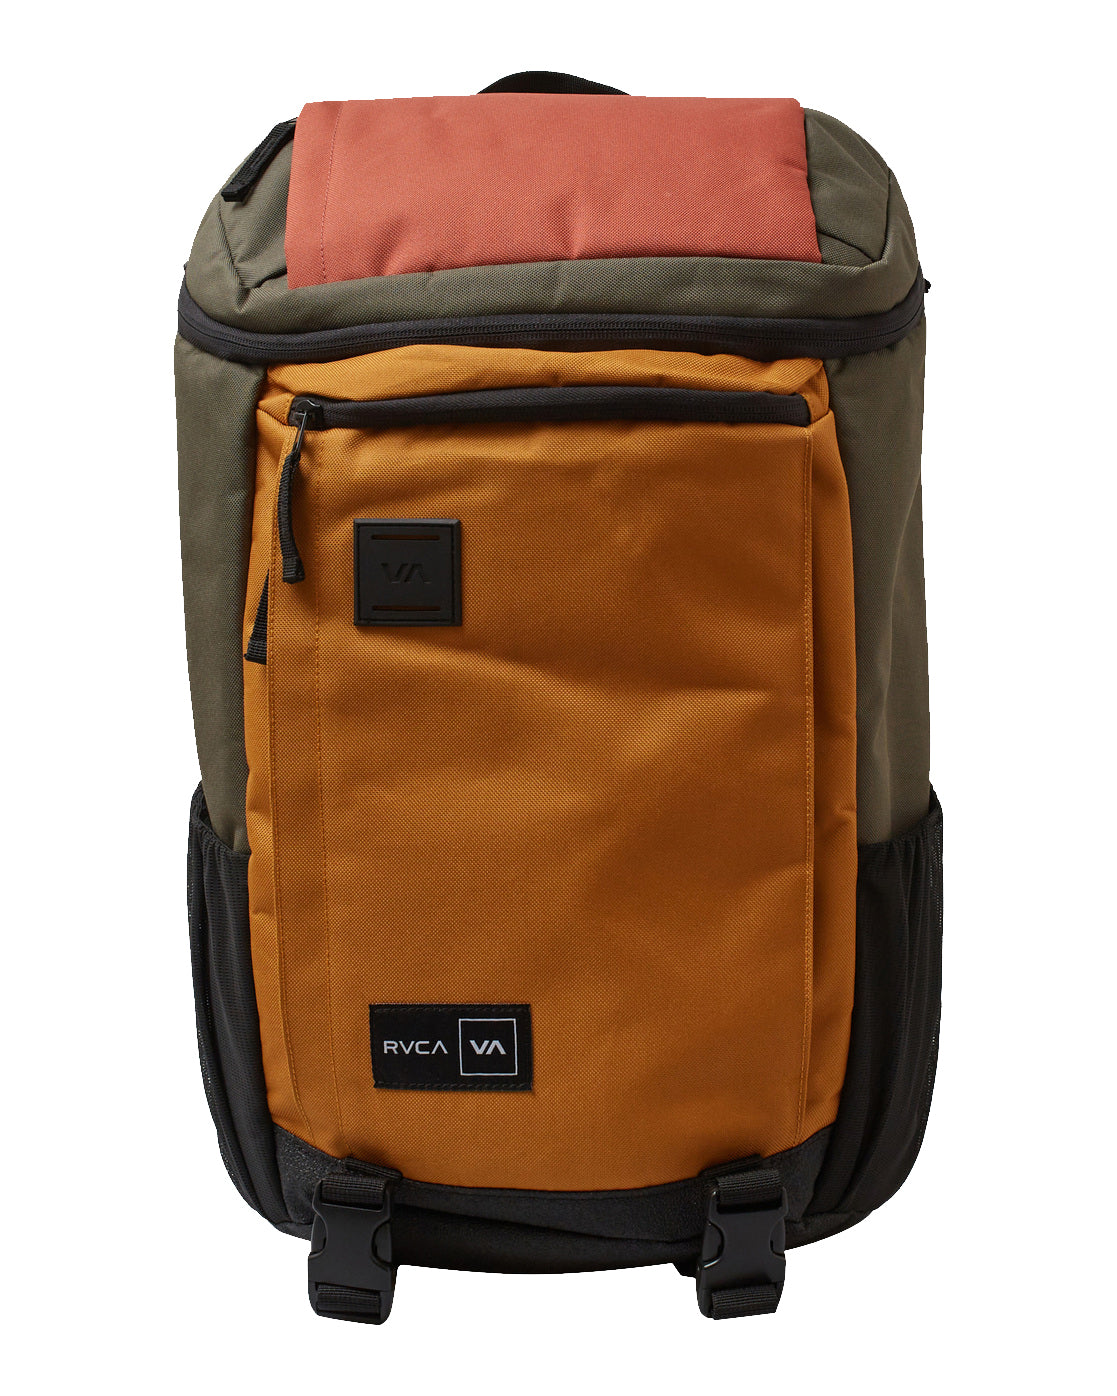 RVCA VOYAGE BACKPACK IV SQO-Sequoia 1SZ